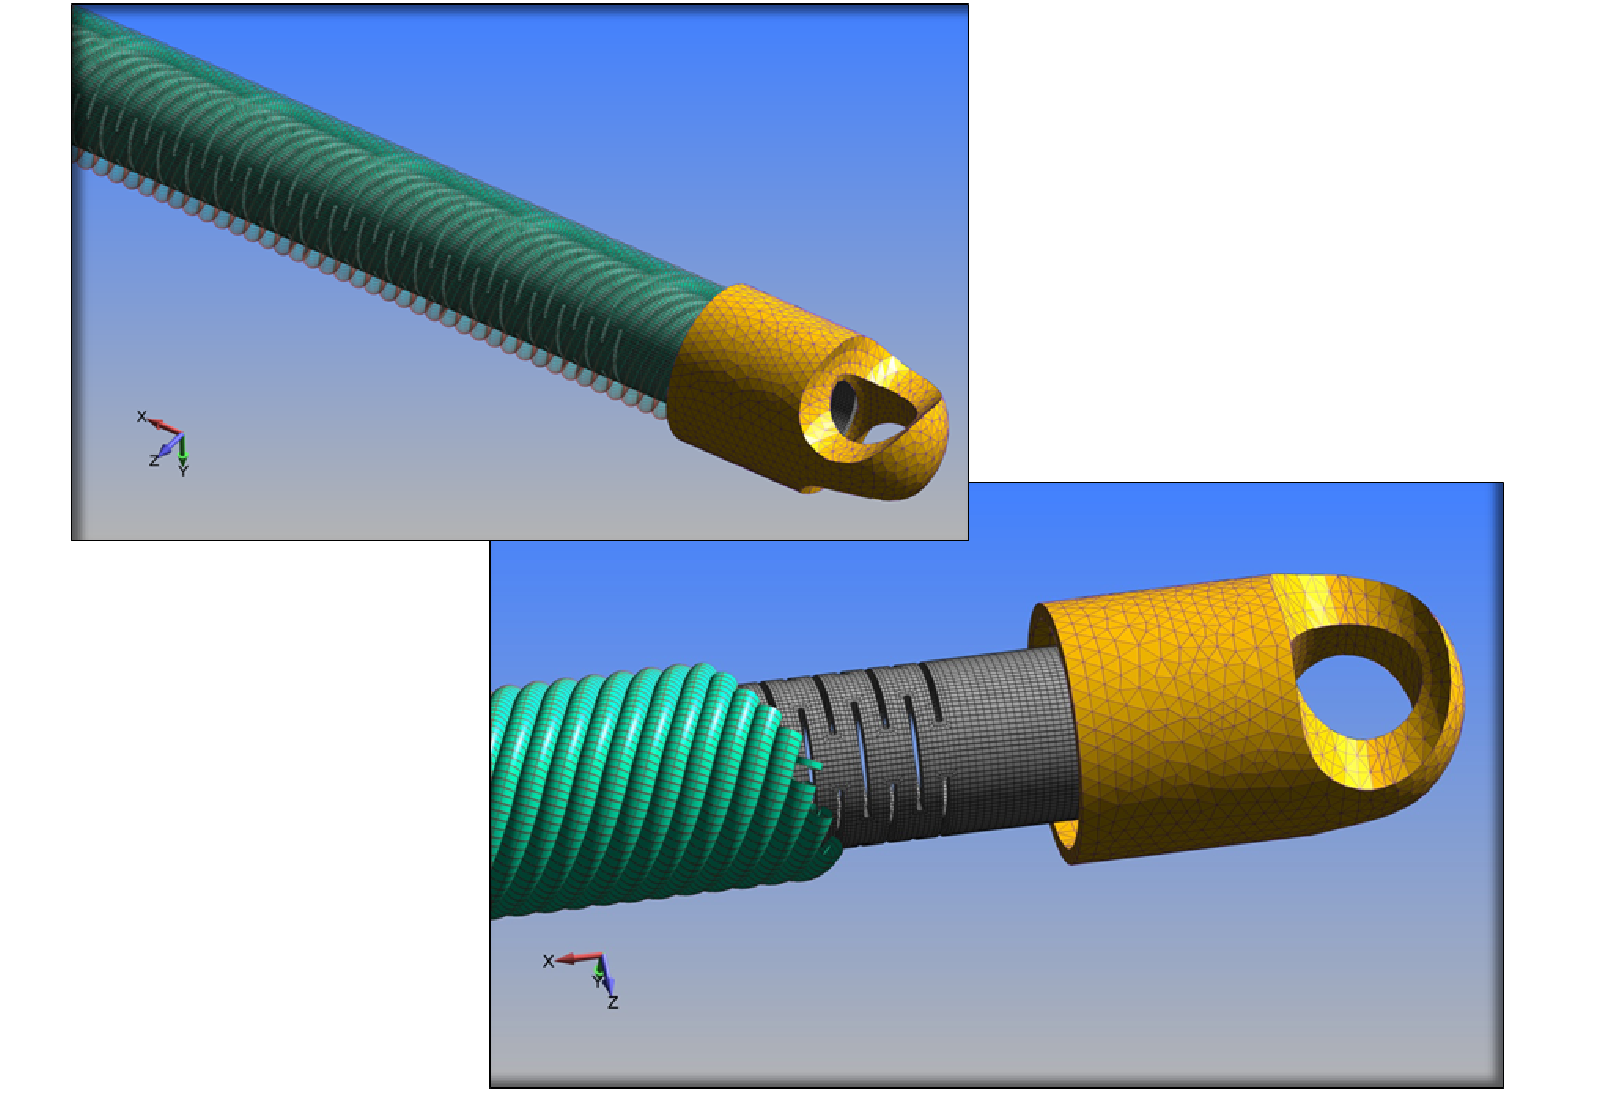 Figure 1: Flexible-shaft medical tool for bone marrow extraction with filar (wire) strands wrapped around a flexible Nitinol tube to provide torsion stiffness while provided an extraction path for the extraction product.